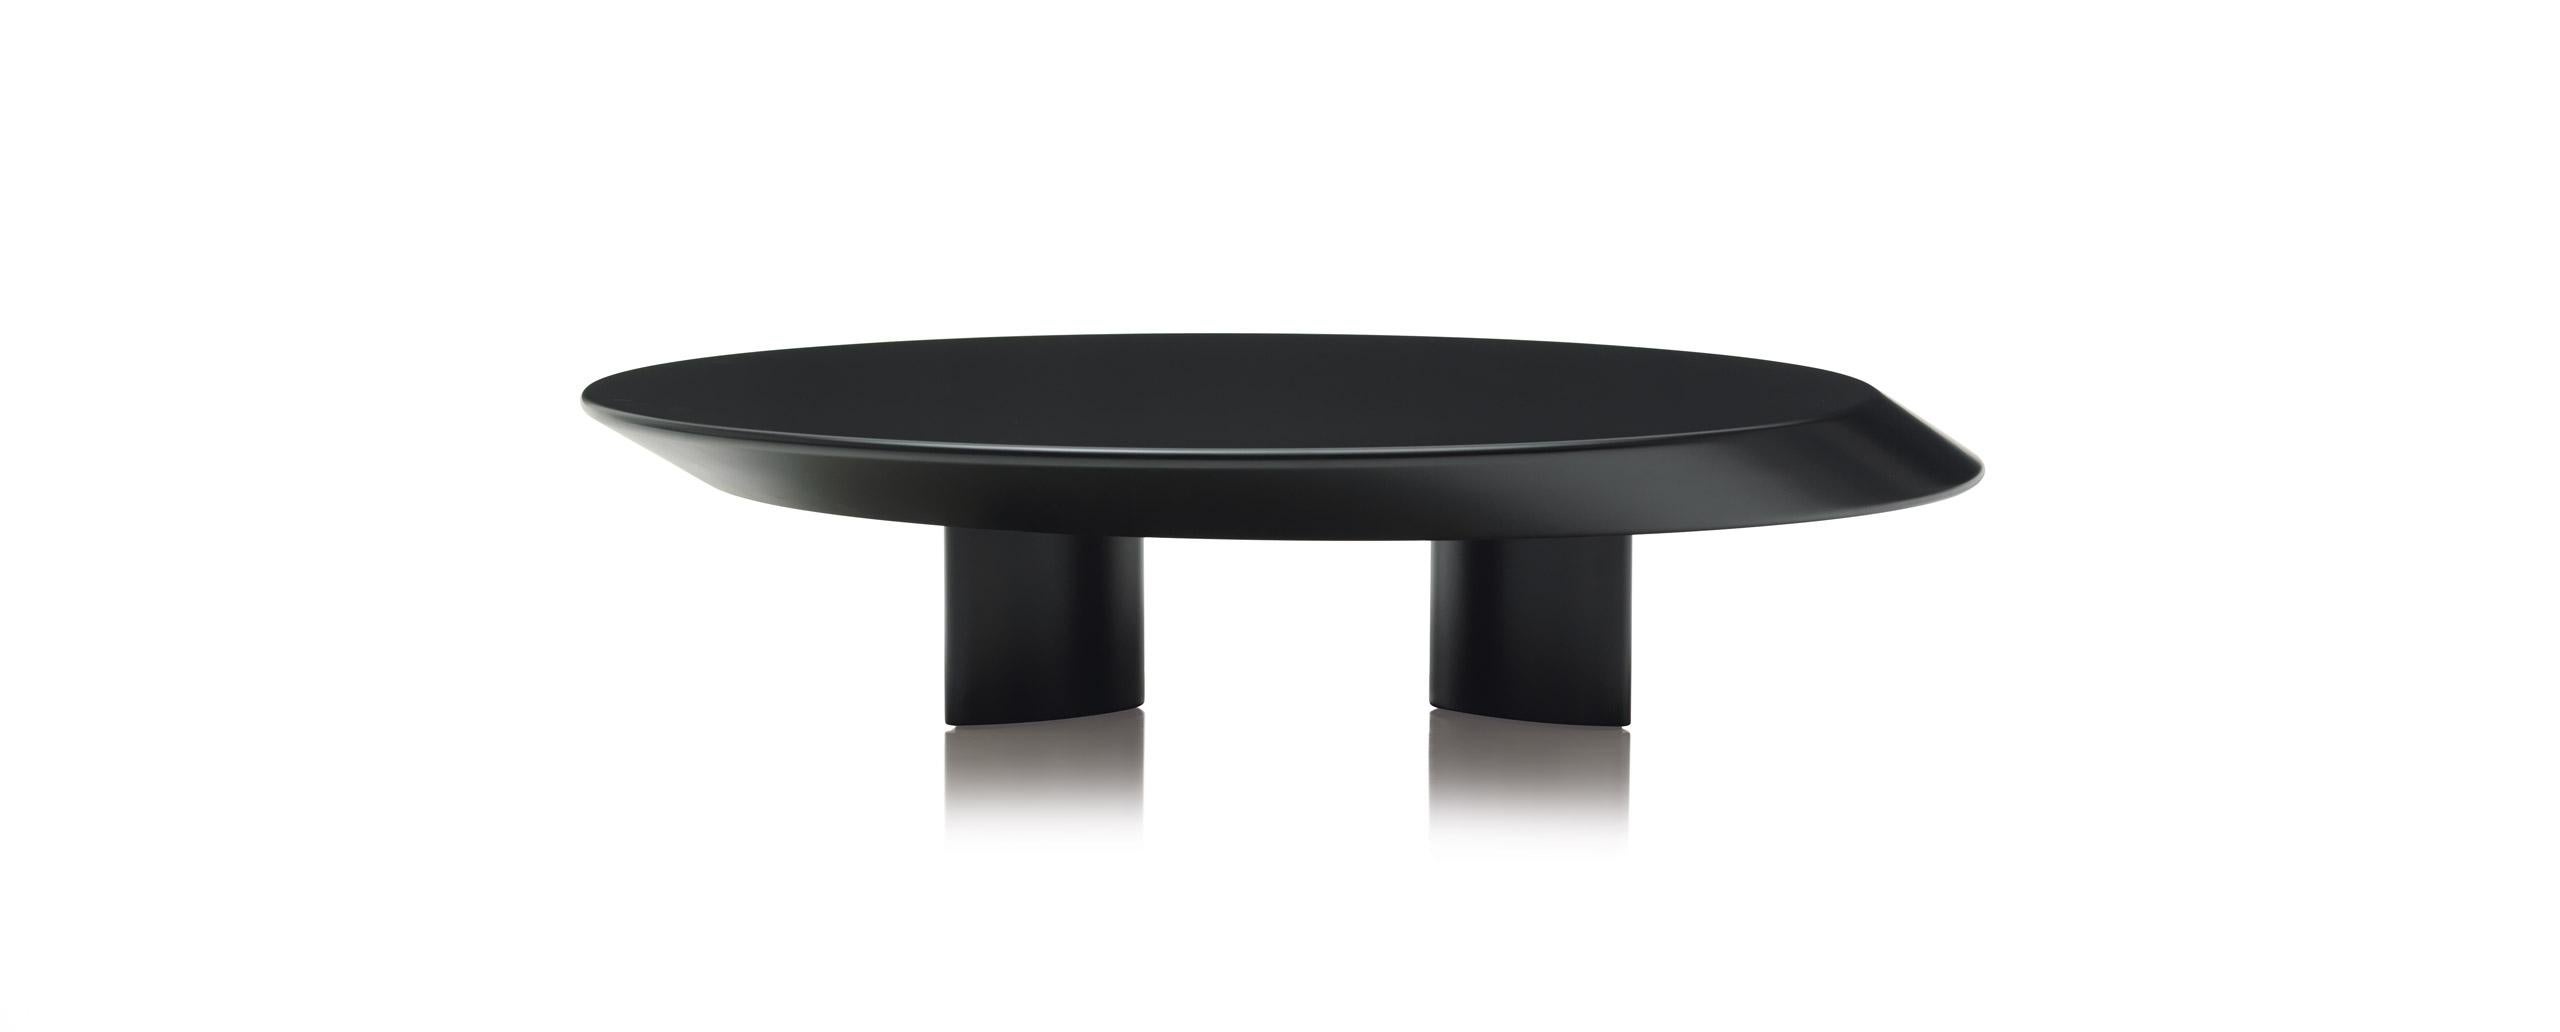 Low table designed by Charlotte Perriand in 1985. Relaunched by Cassina in 2009.
Manufactured by Cassina in Italy.

This low table, with its audacious sculptural look, was designed by Charlotte Perriand on the occasion of the retrospective